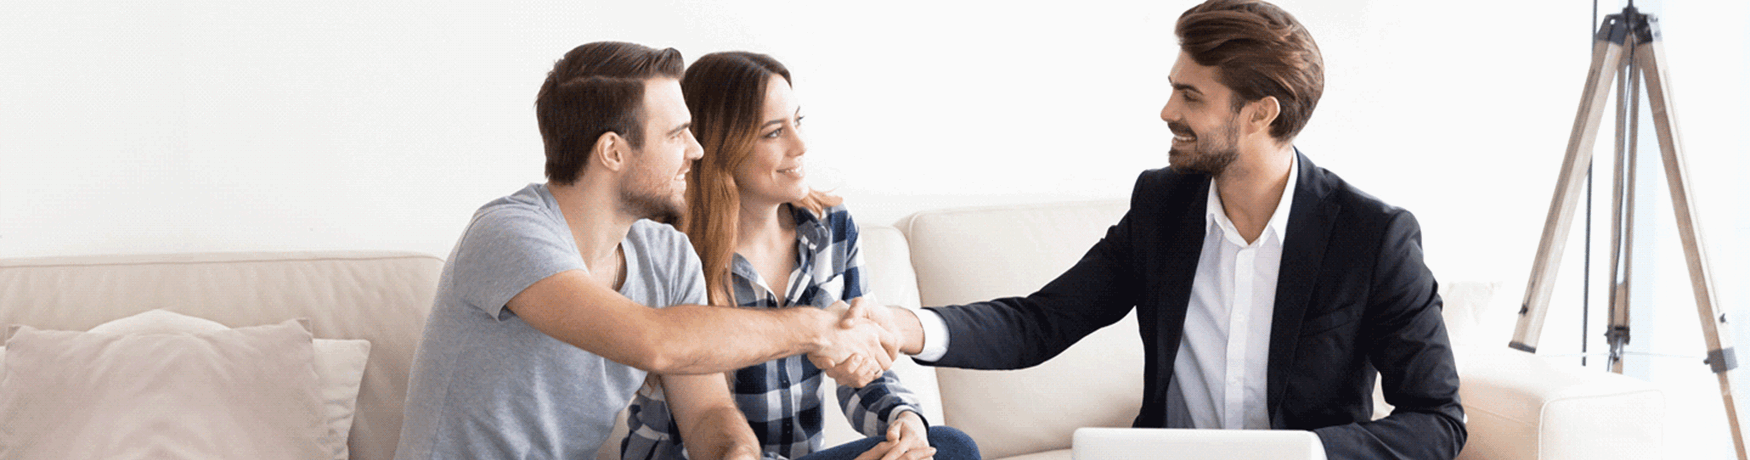 Couple shaking hands with a business man on a couch